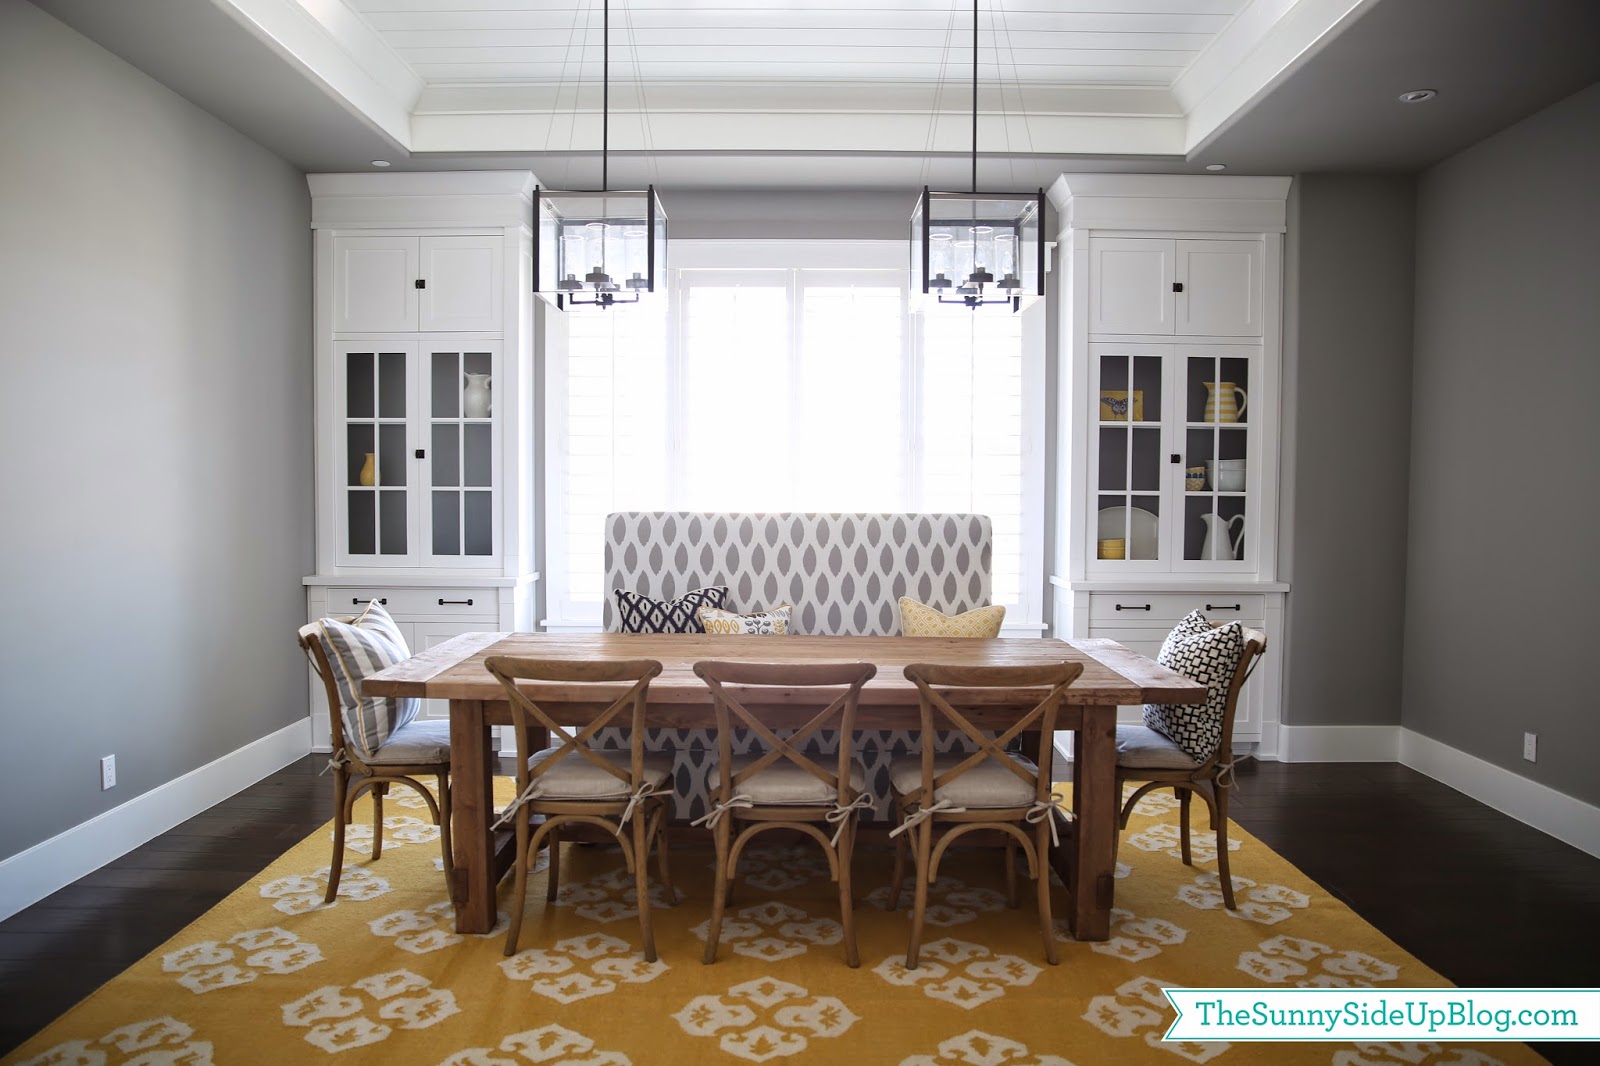 Dining room decor update (bench, chairs, pillows) - The Sunny Side Up Blog